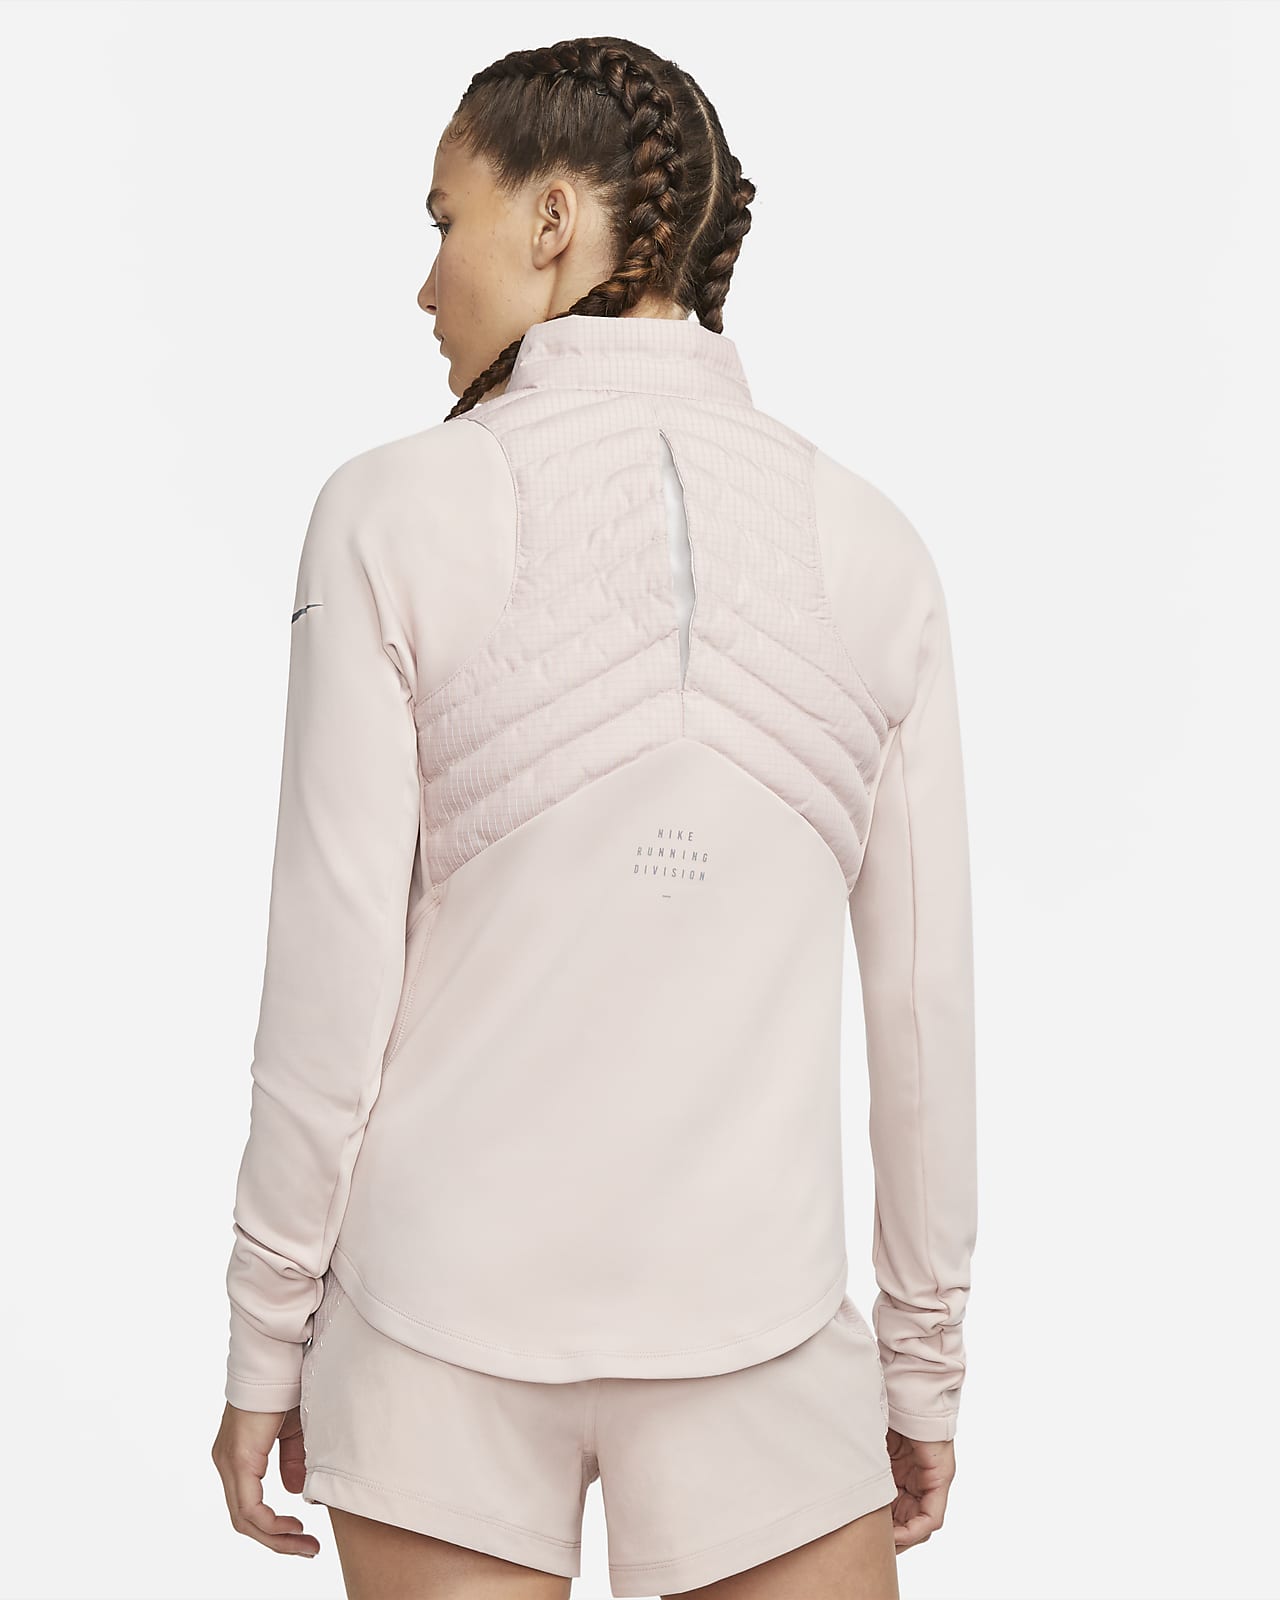 Therma-FIT-X Hybrid Running Jacket